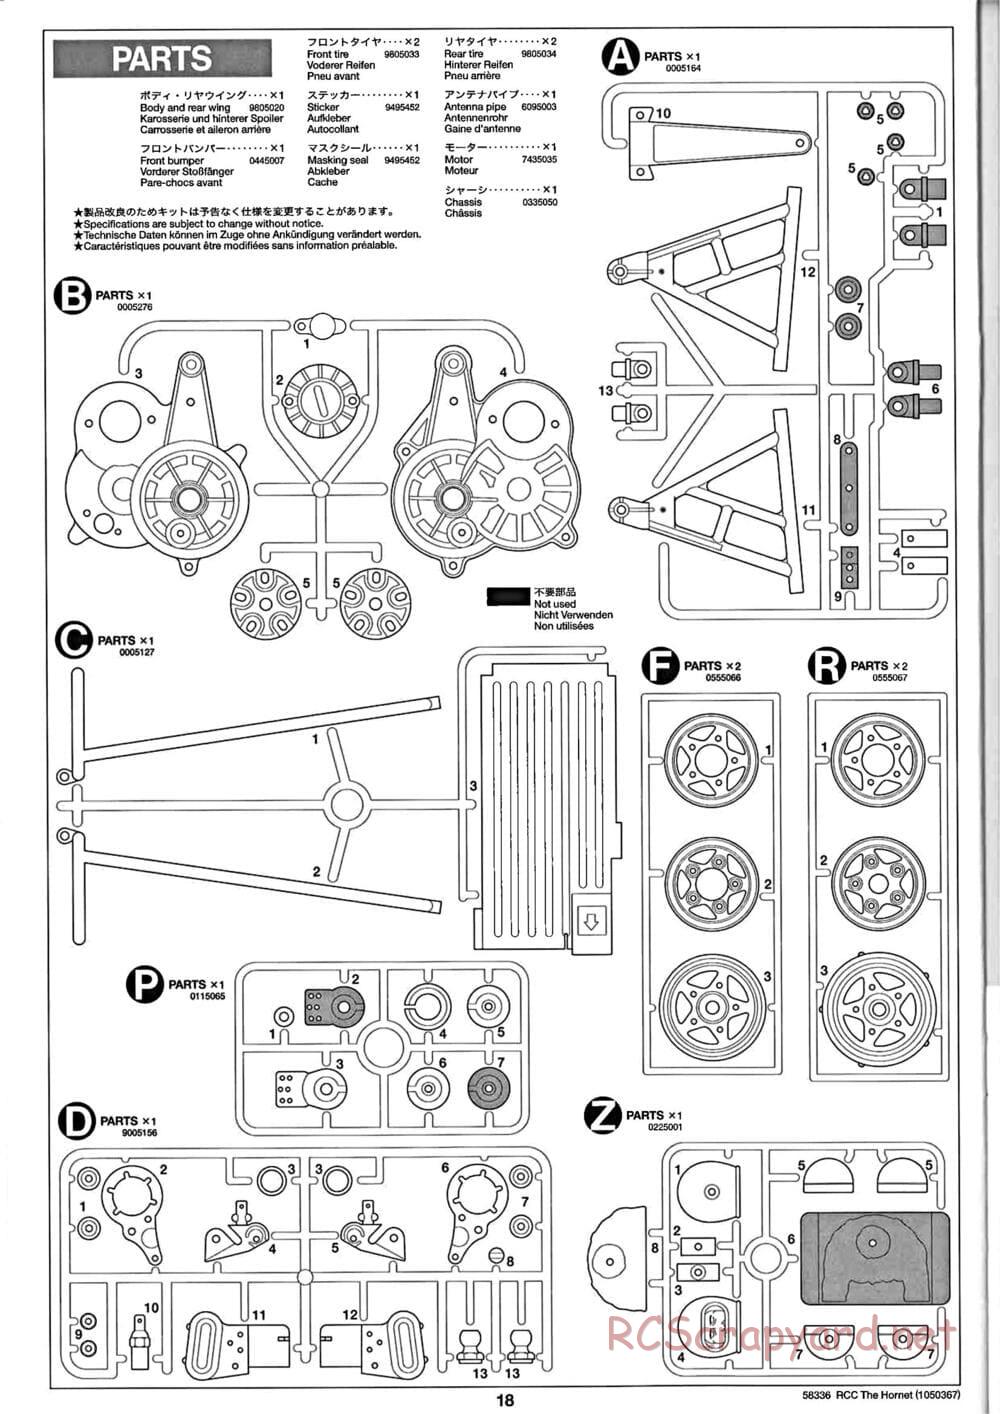 Tamiya - The Hornet (2004) - GH Chassis - Manual - Page 18